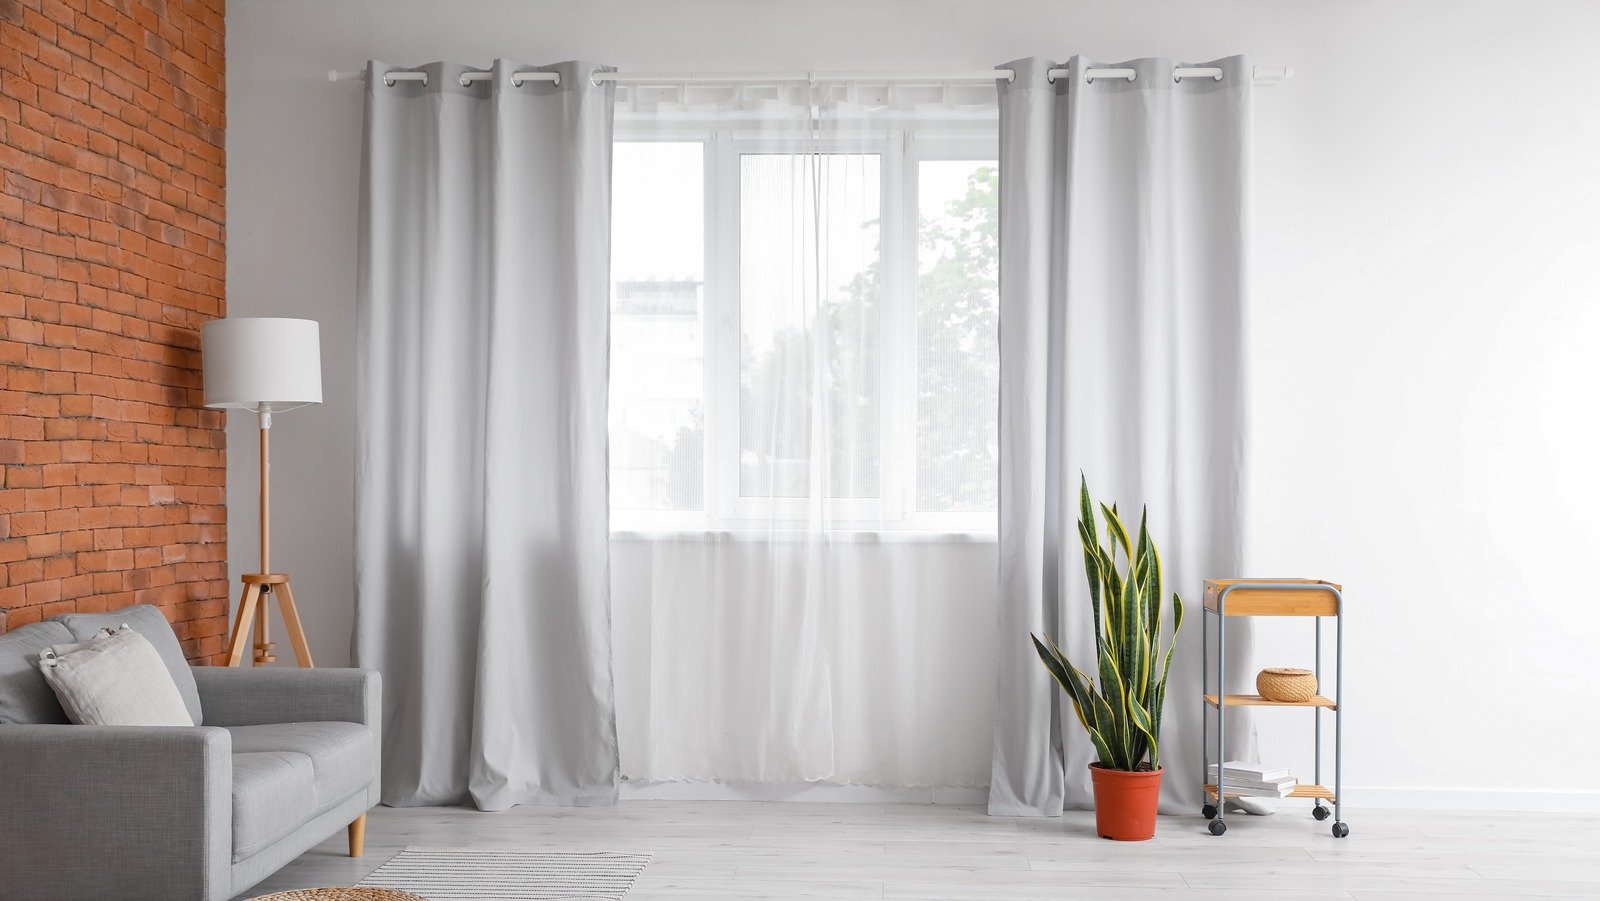 How To Decorate With Popular Curtain Styles - House Digest